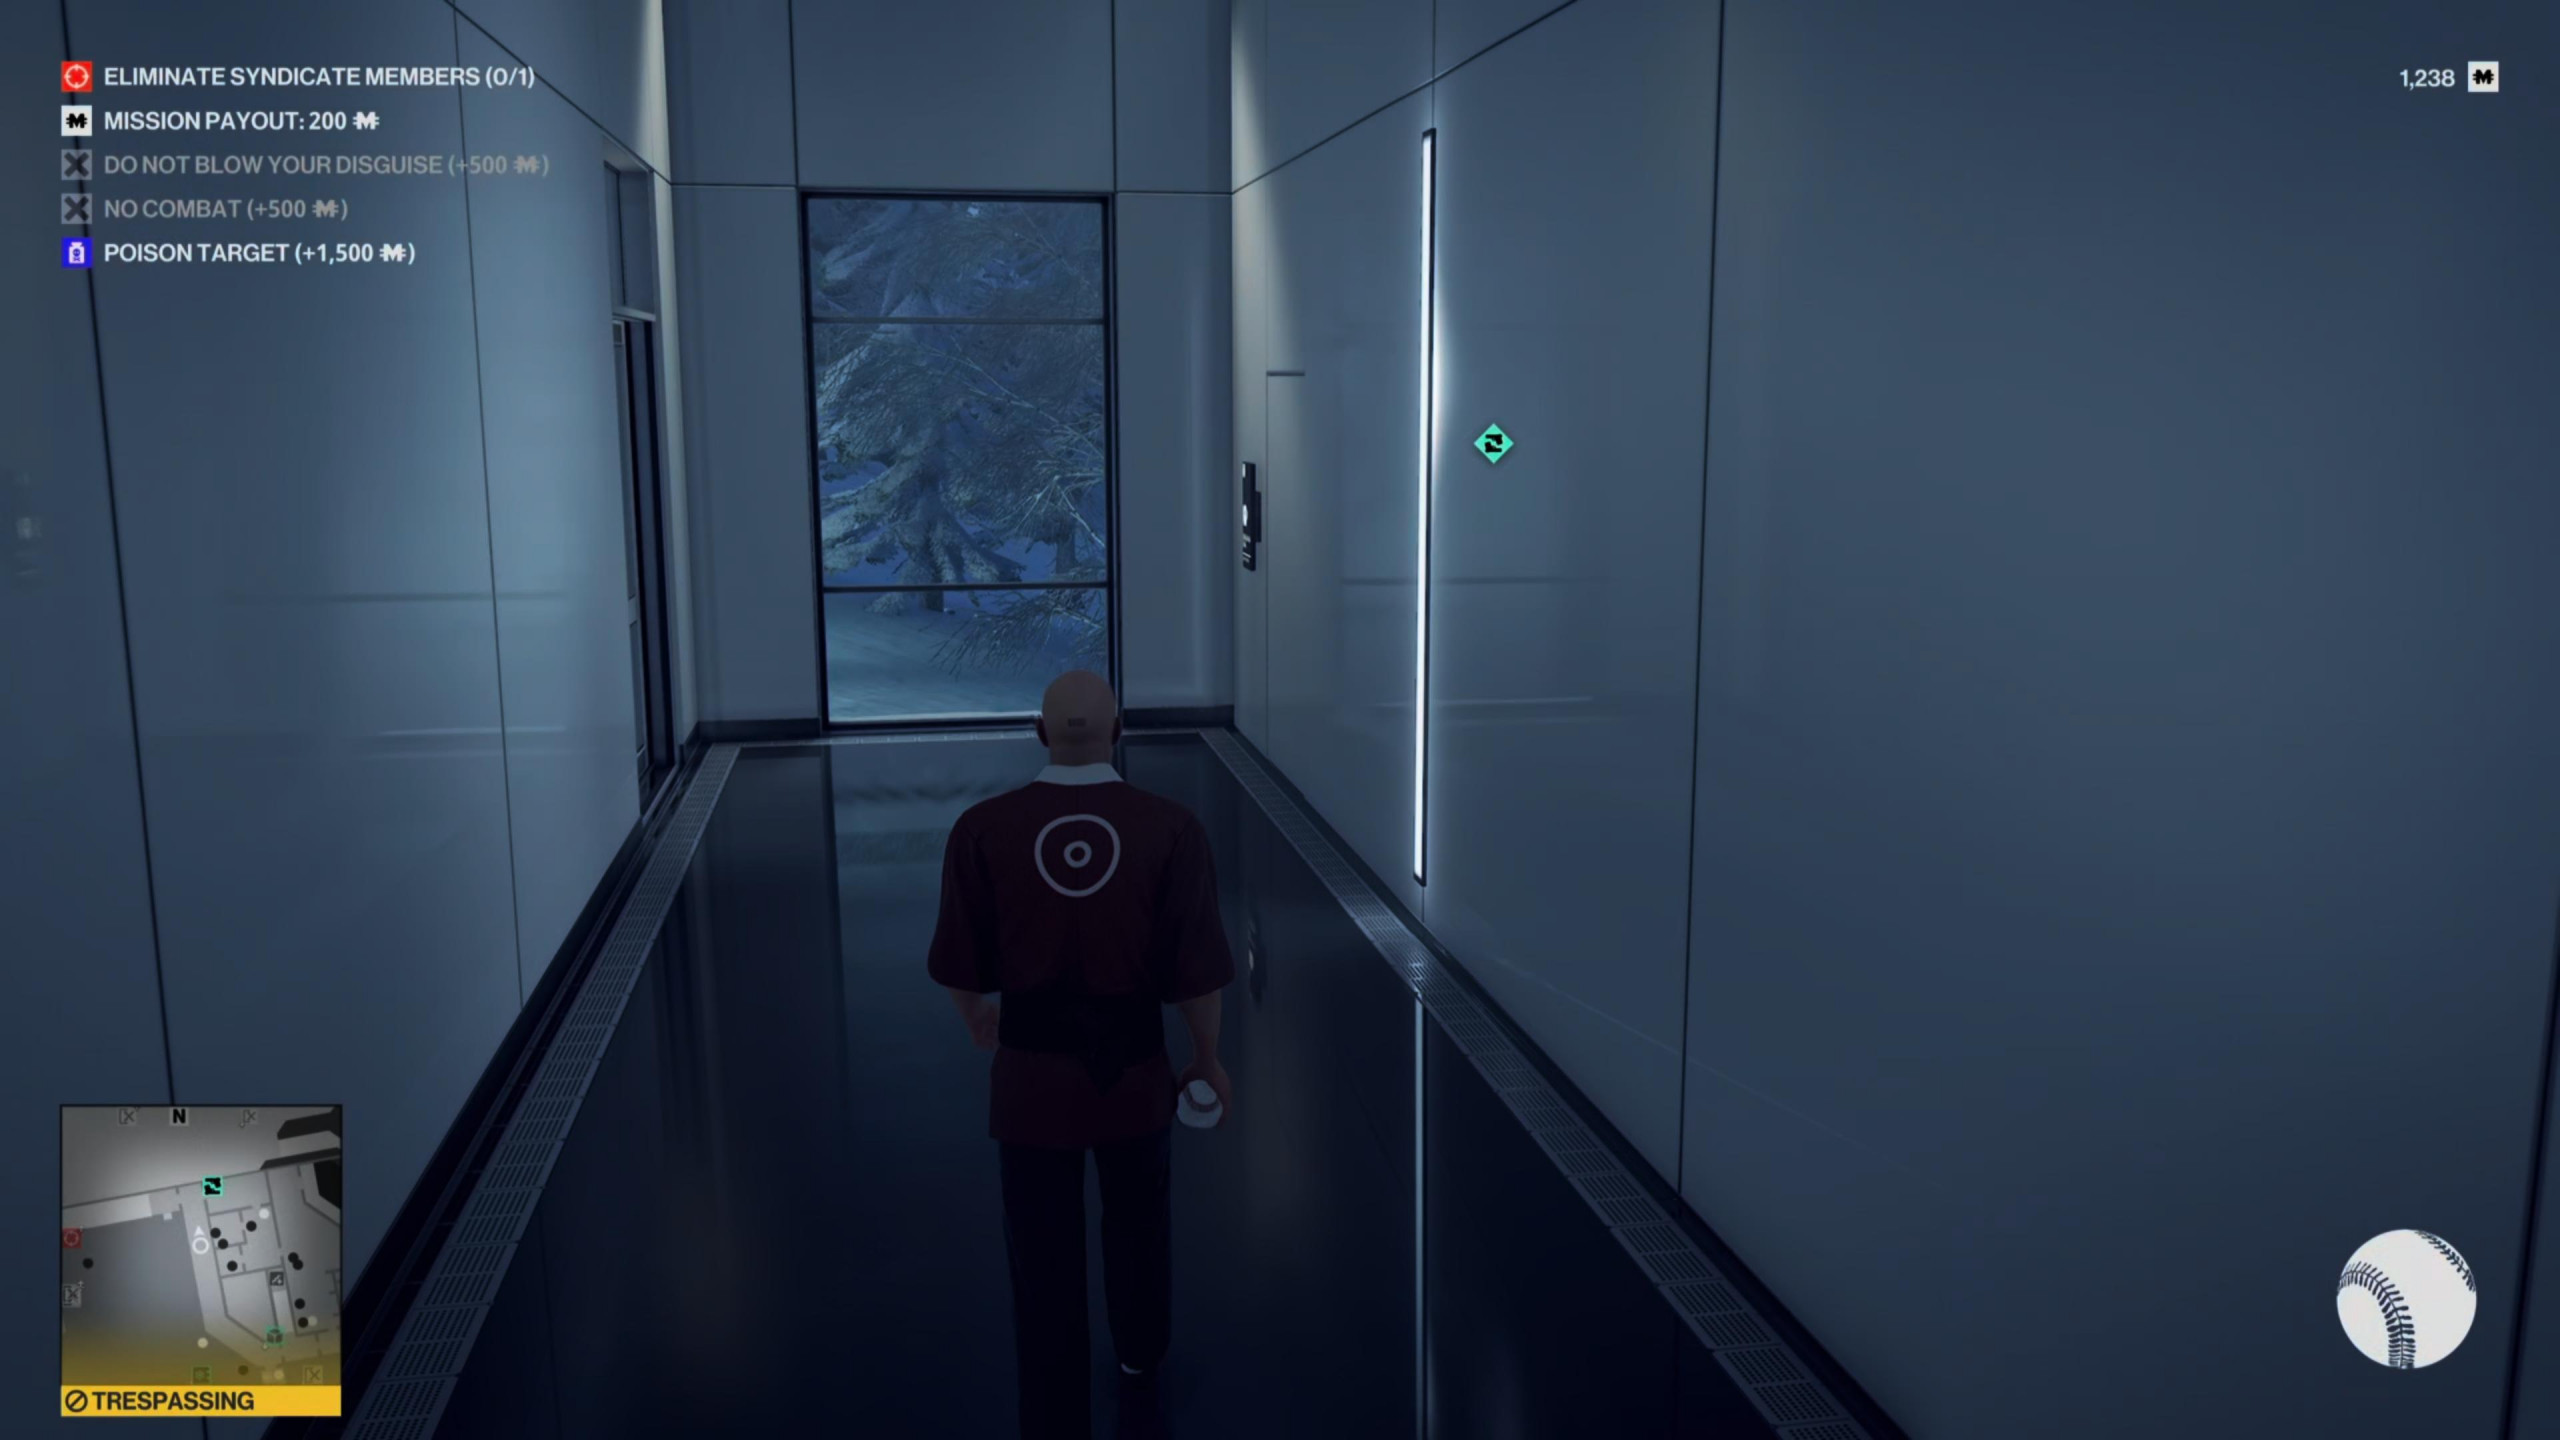 Agent 47 disguised as a masseur as he walks down a clinical looking corridor on a mission in Asia. 